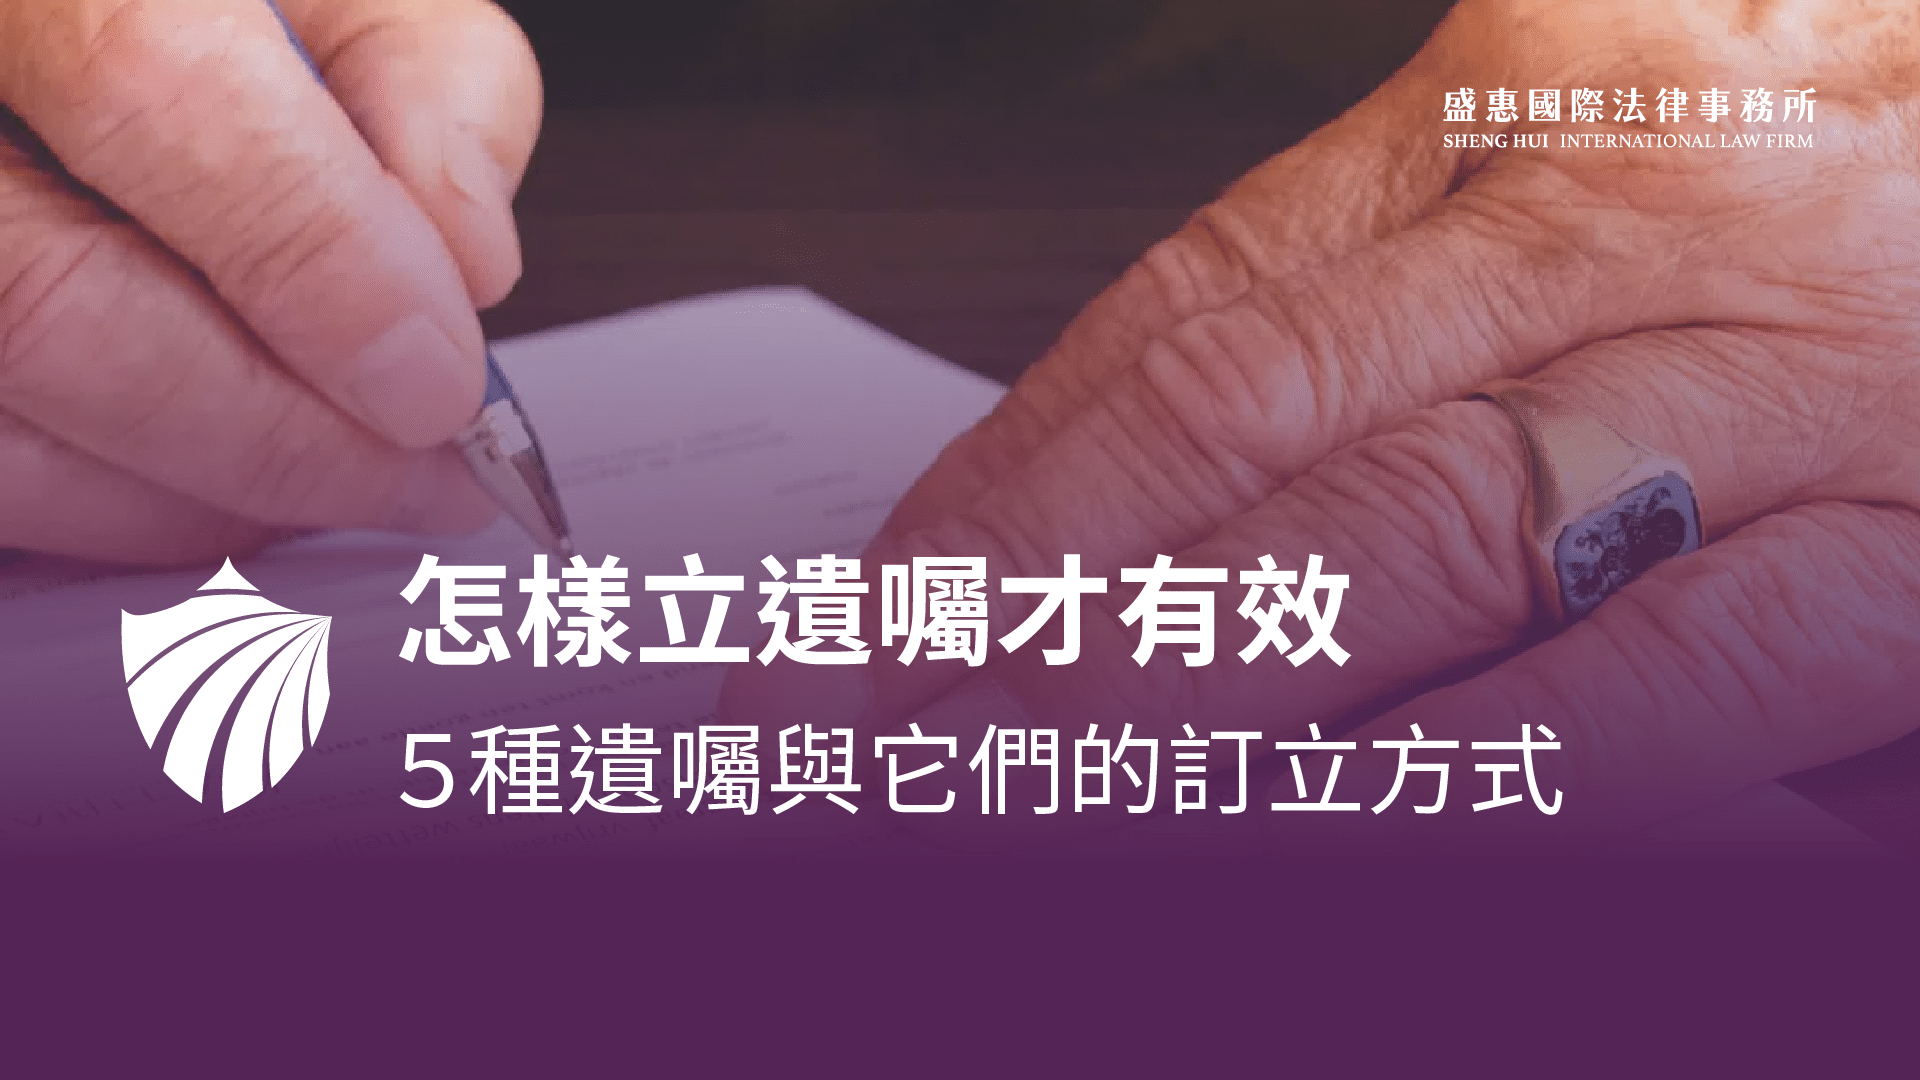 Read more about the article 如何訂立遺囑？